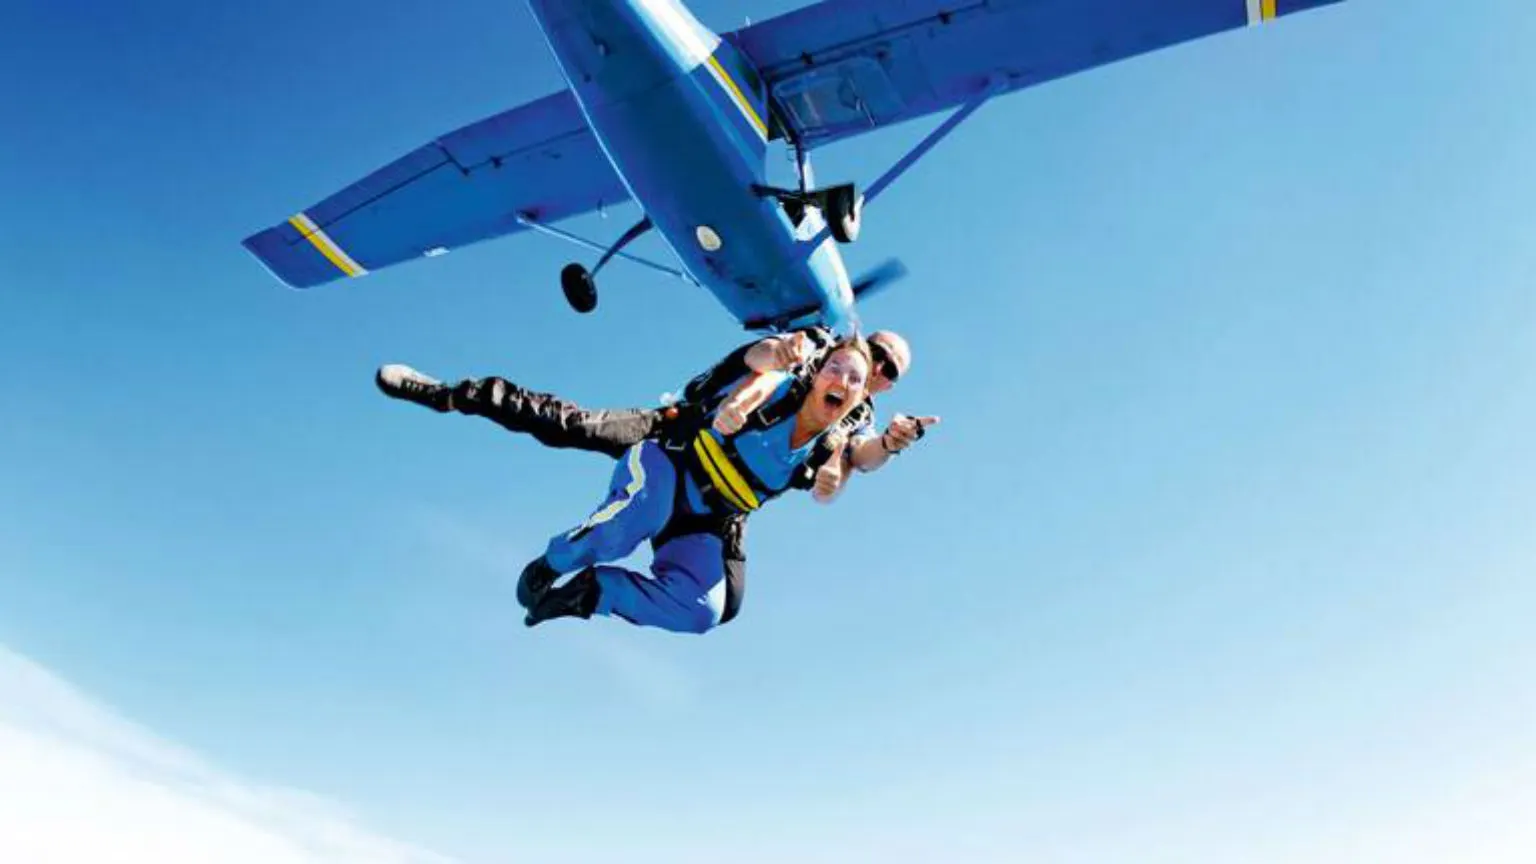 Skydiving experience in Melbourne 